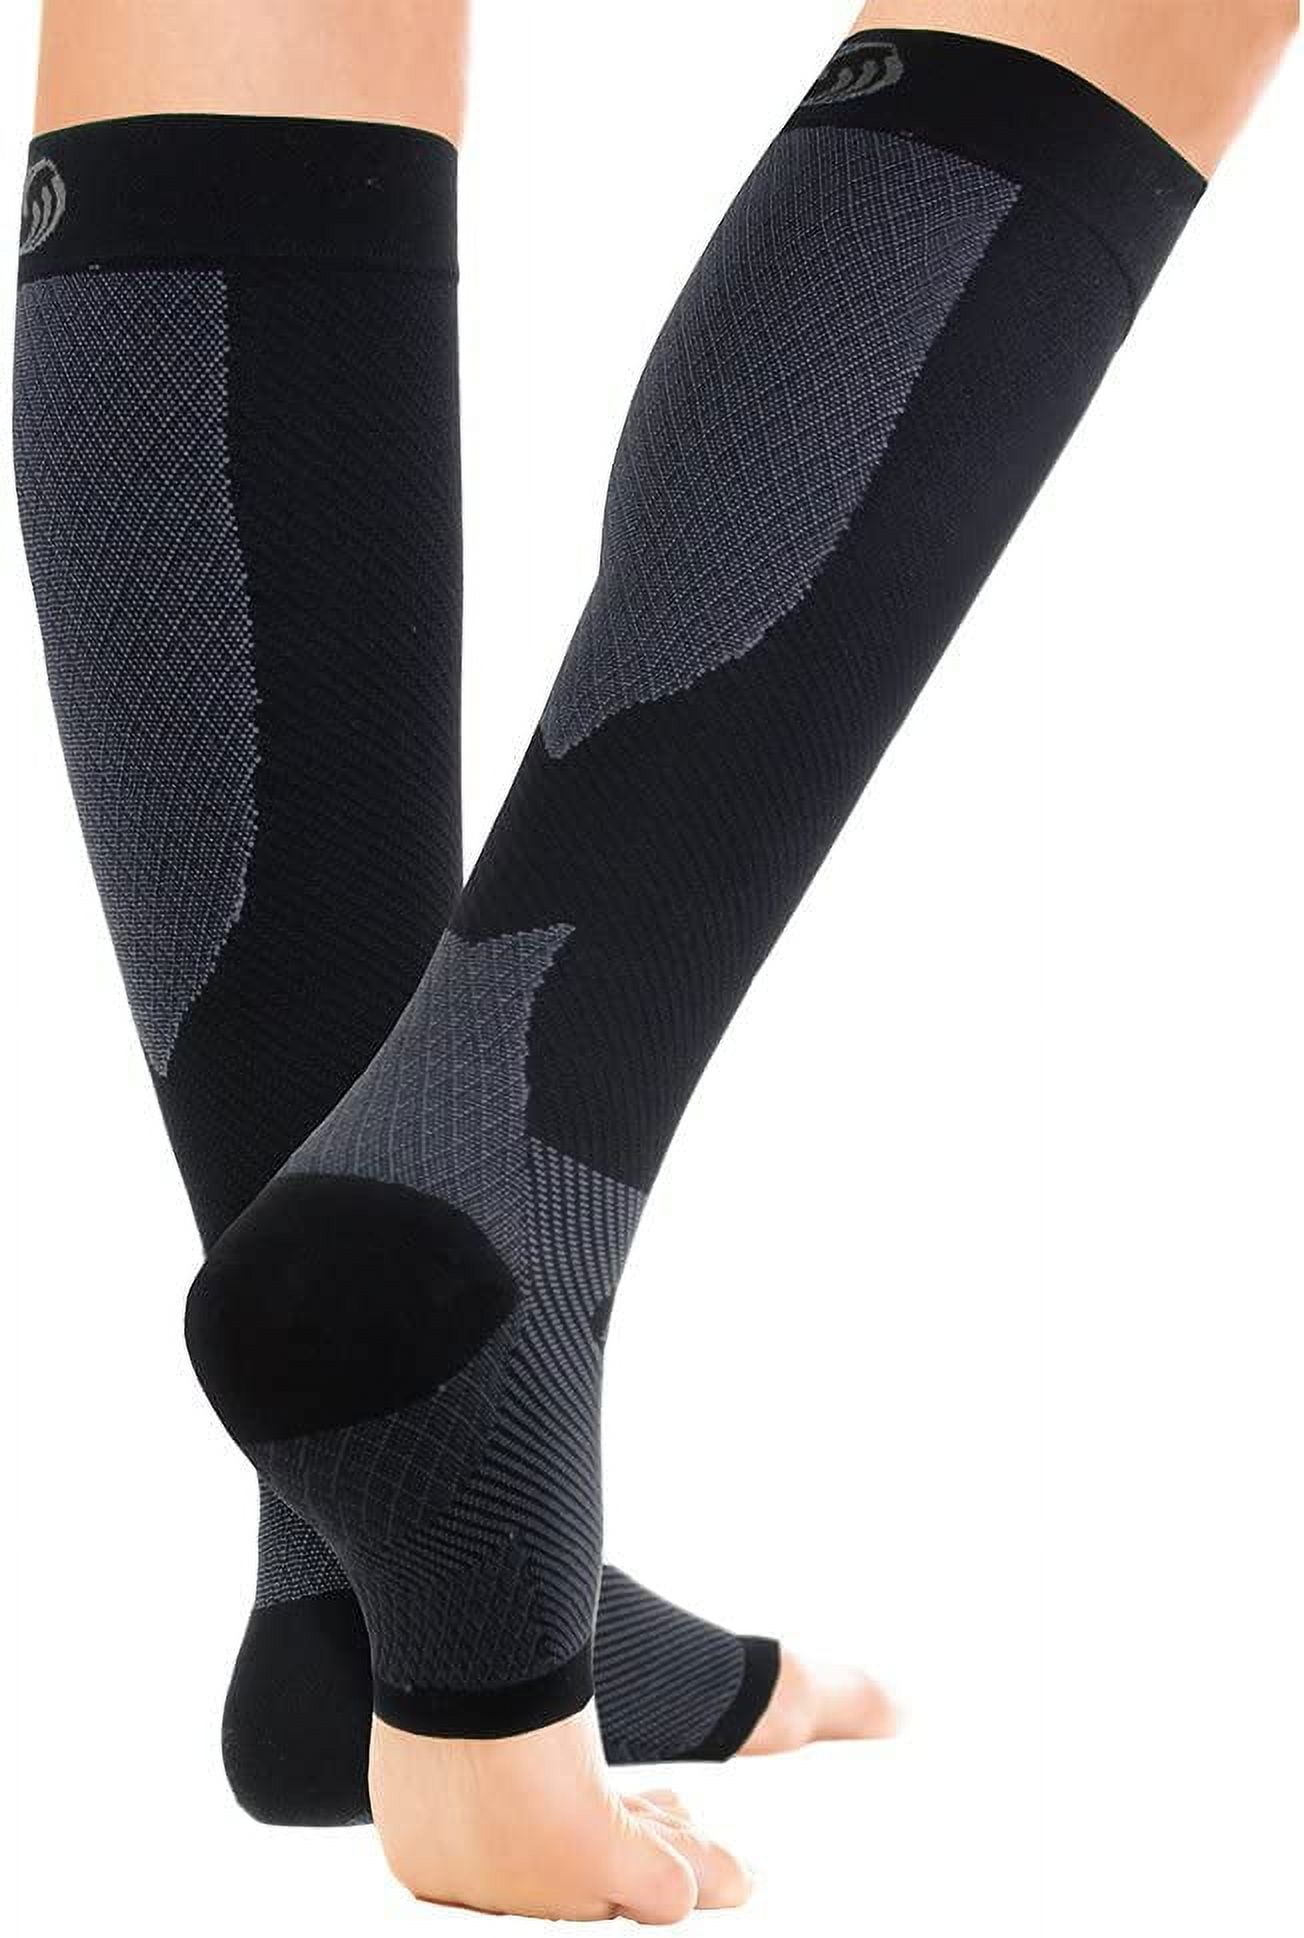 Compression Foot & Leg Sleeves for Swelling, Venous Insufficienty